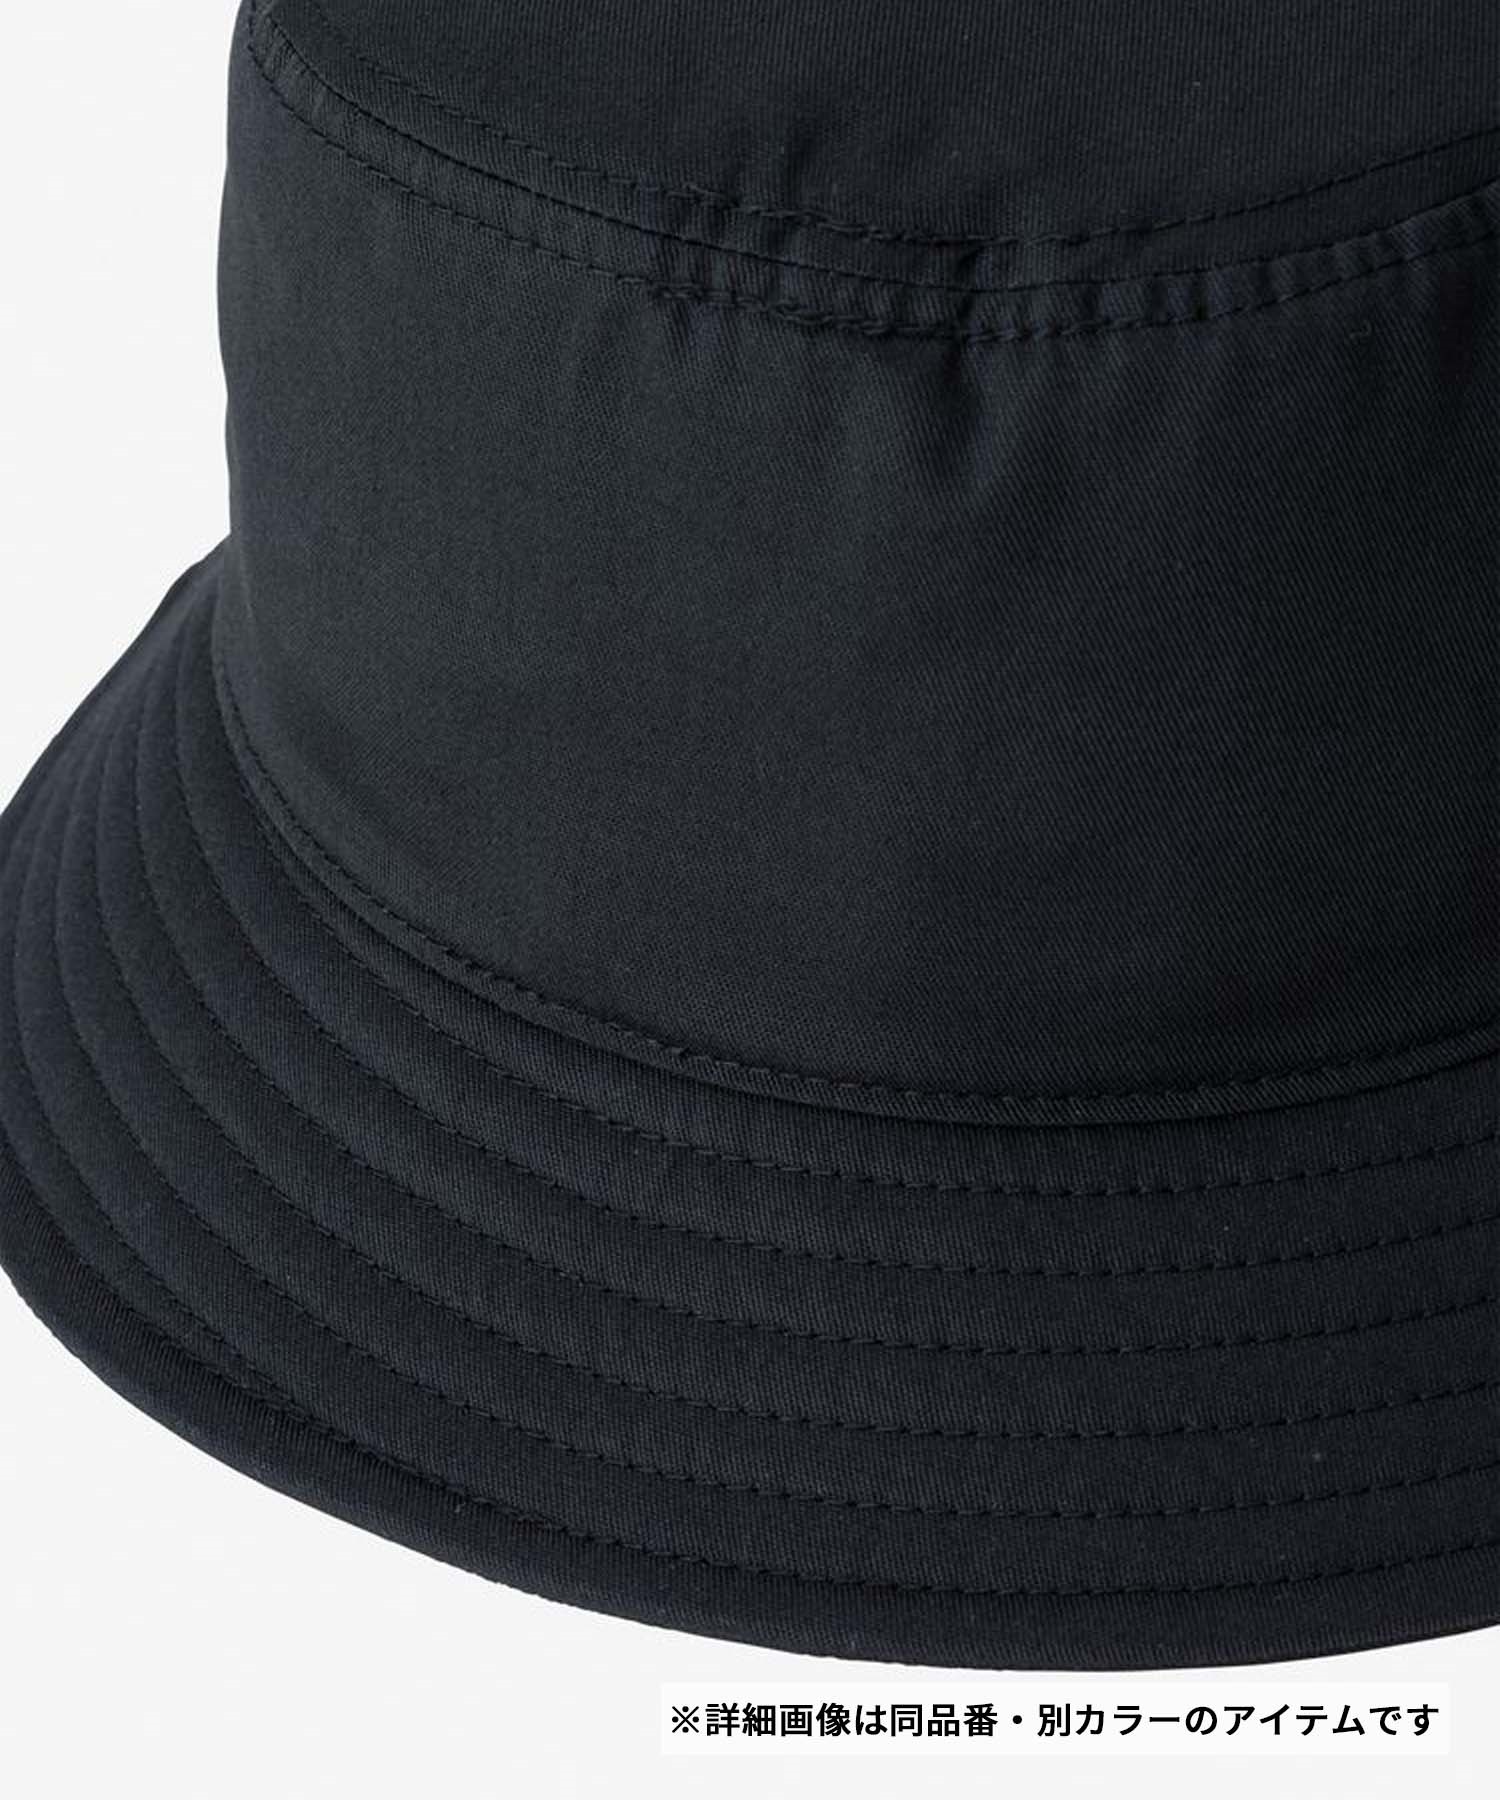 THE NORTH FACE ザ・ノース・フェイス MESSAGE HAT メッセージハット キッズ バケットハット NNJ02408(KT-S)